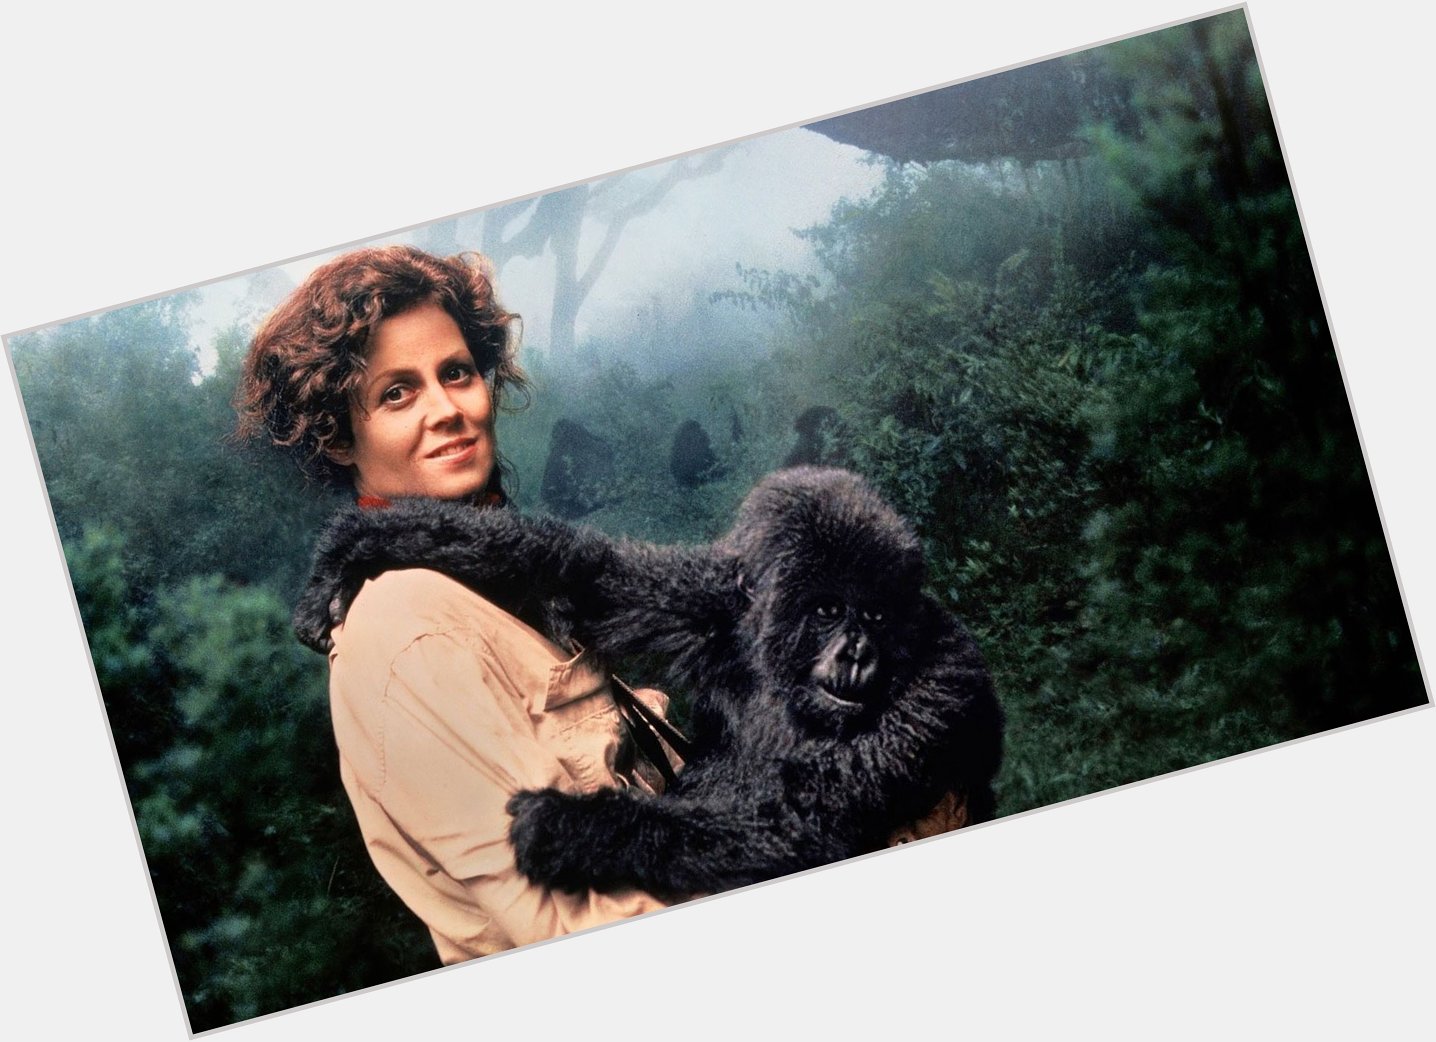 Dian Fossey hairstyle 3